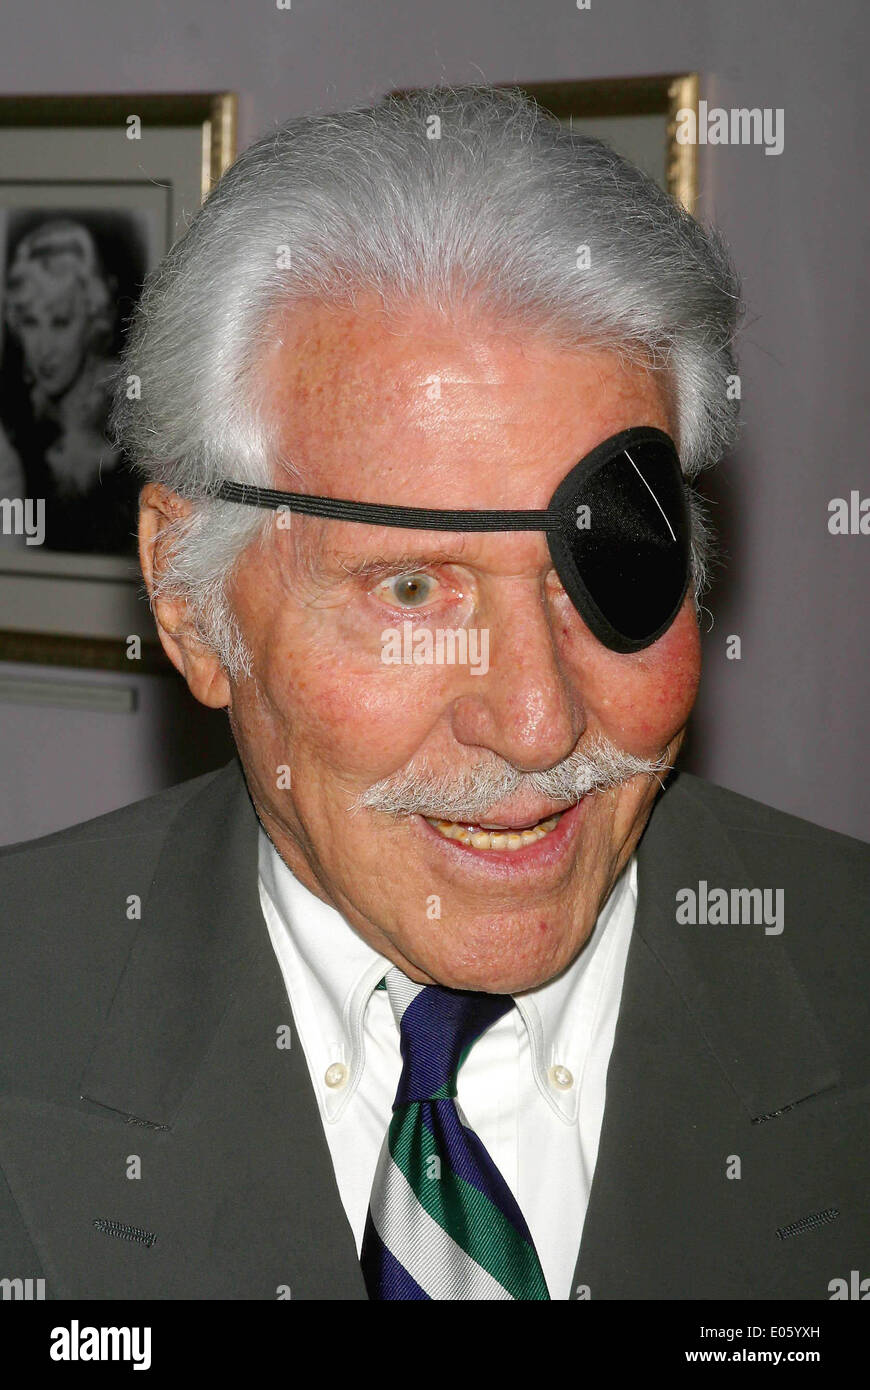 May 2, 2014 - The American actor EFREM ZIMBALIST JR, who starred in the long-running TV show The FBI, has died at the age of 95. Zimbalist Jr played Inspector Lewis Erskine in the show, which ran from 1965 until 1974. Before that he became a household name in the US playing private investigator Stu Bailey in 77 Sunset Strip, which ran from 1958-64. Later in life he retired to his ranch in Solvang, California, where he died on Friday. PICTURED - Nov. 11, 2003 - Los Angeles, California, U.S. - Efrem Zimbalist, Jr. at the unveiling of 'Golden Gun' and F.B.I. badge from the hit series 'The F.B.I. Stock Photo